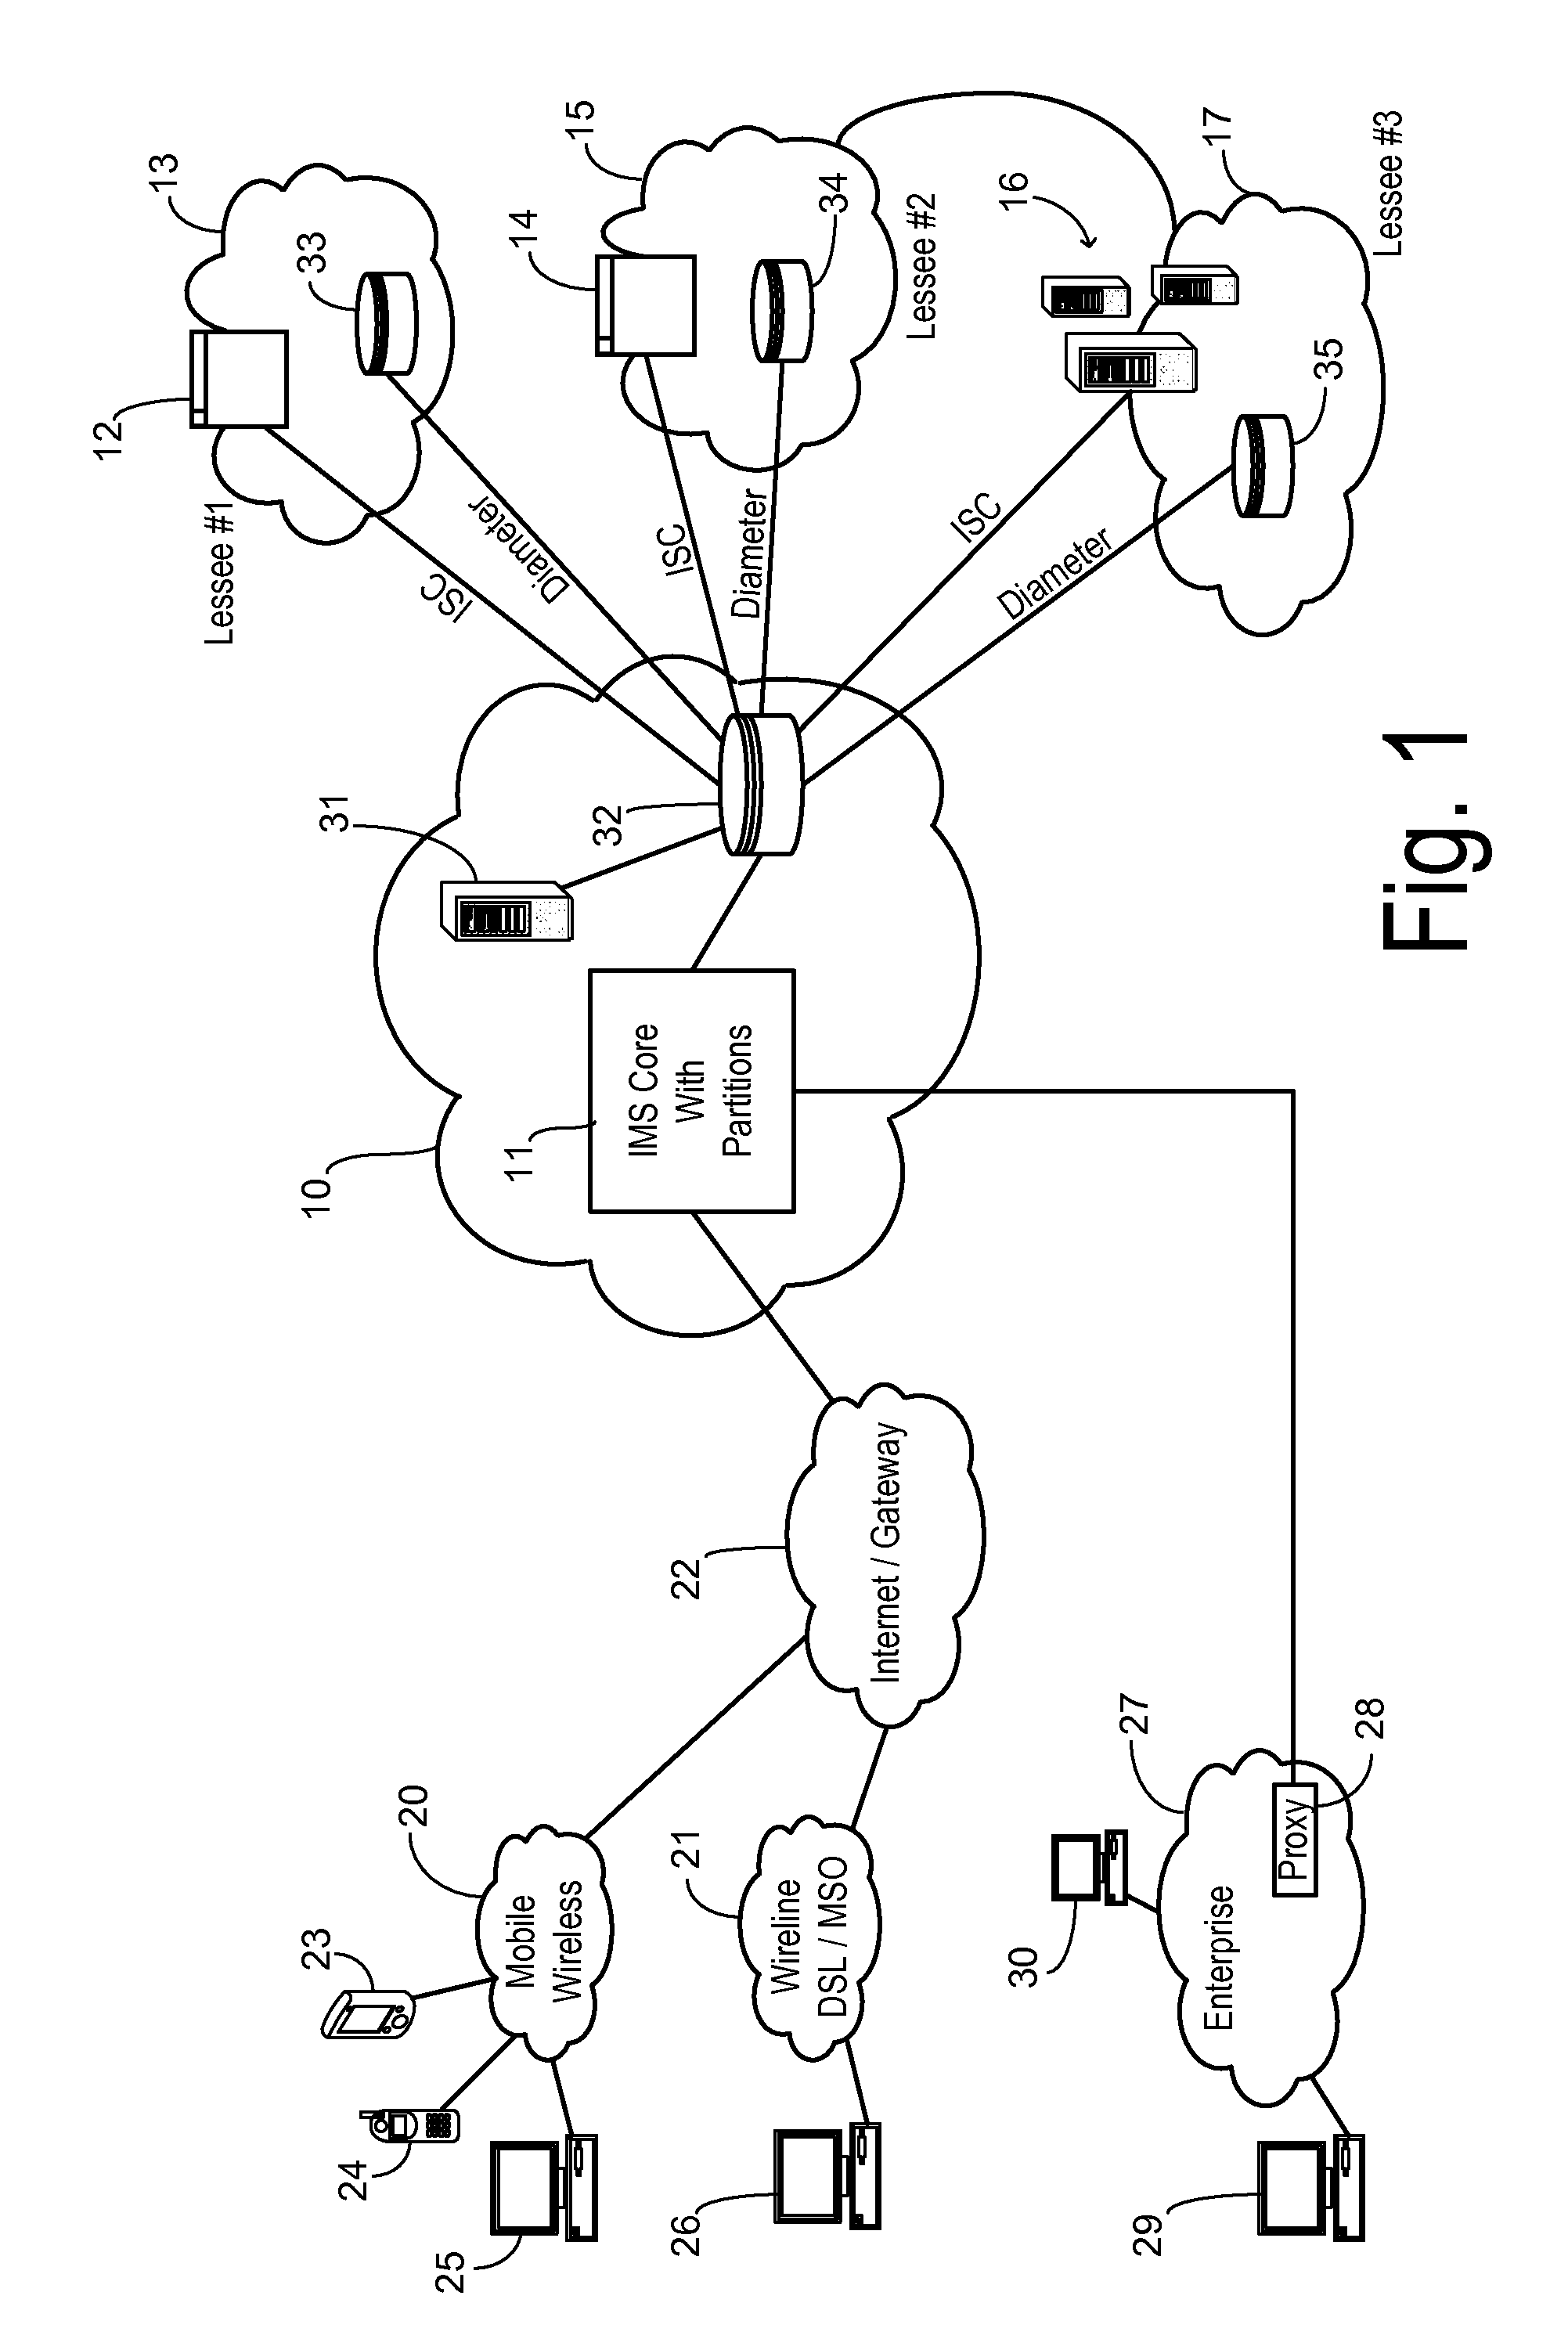 Partitioned IP multimedia subsystem call session control function